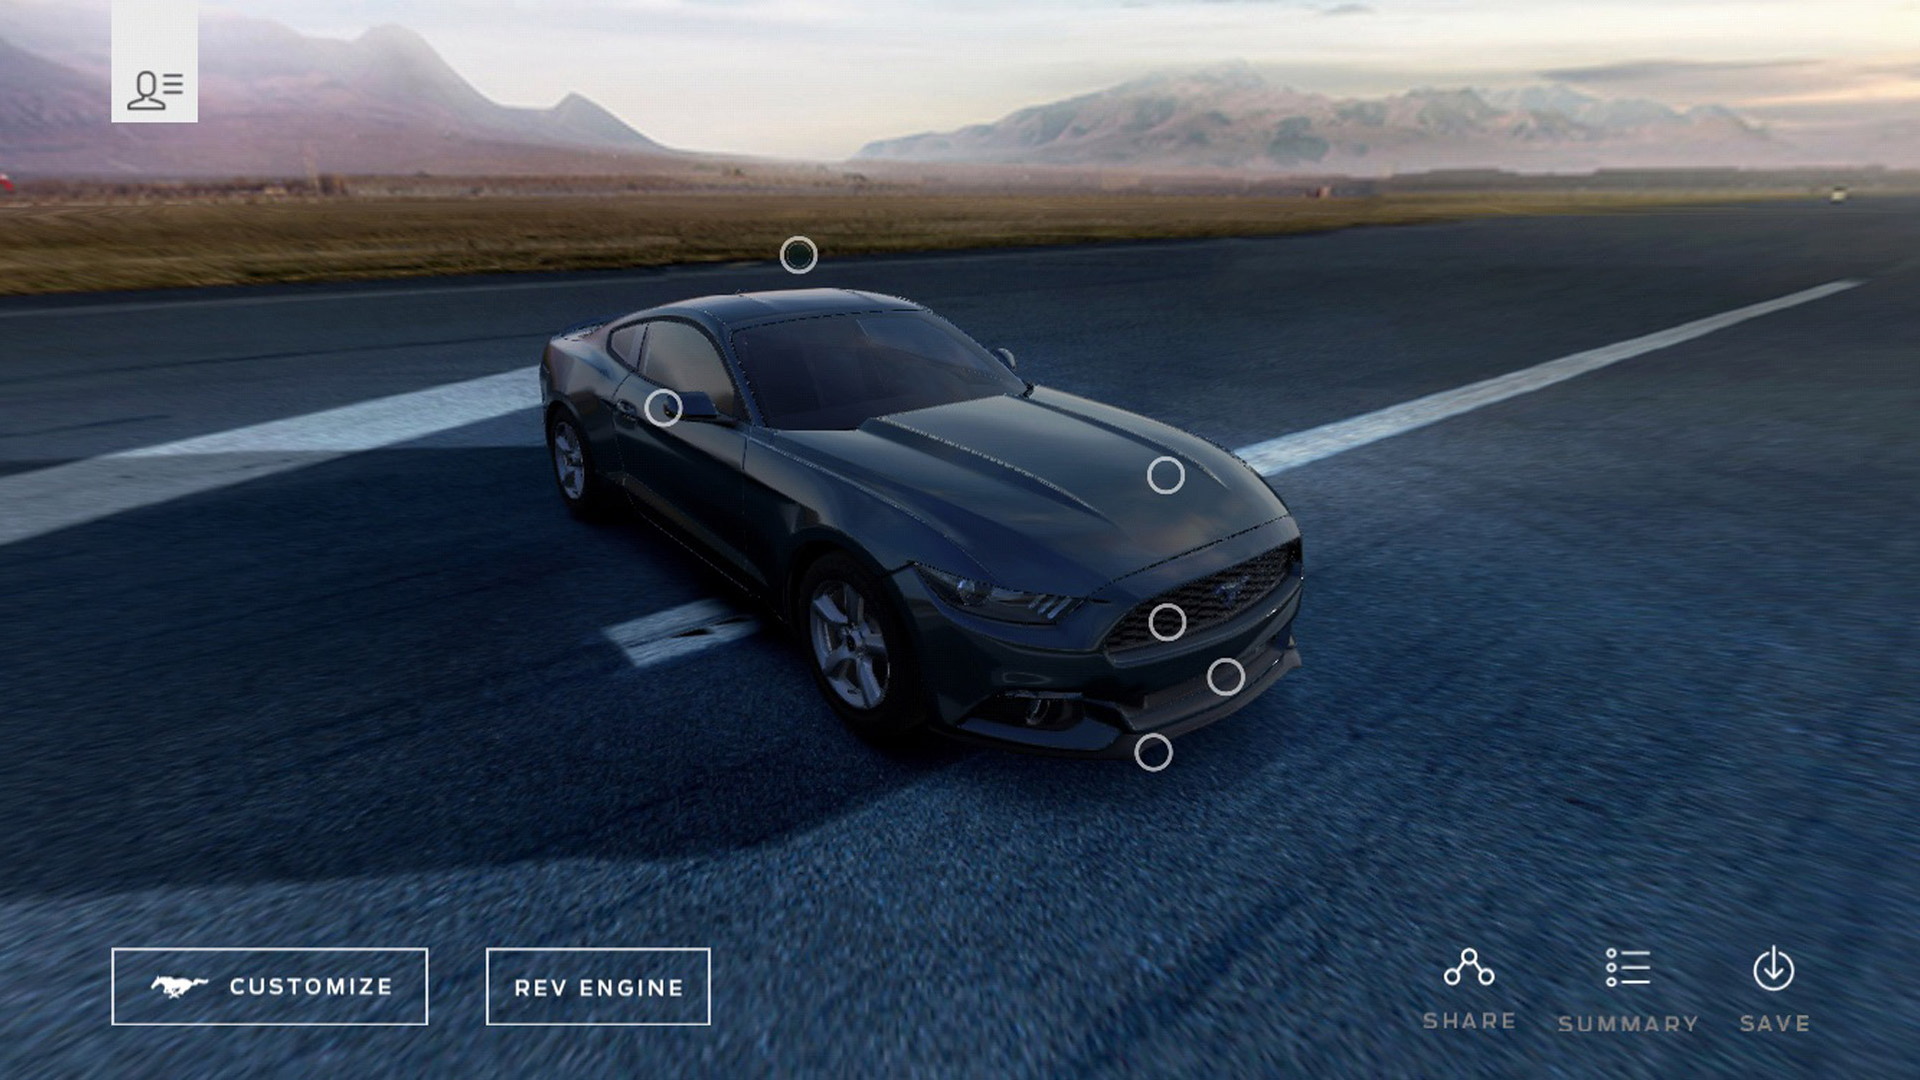 Ford Mustang Customizer app